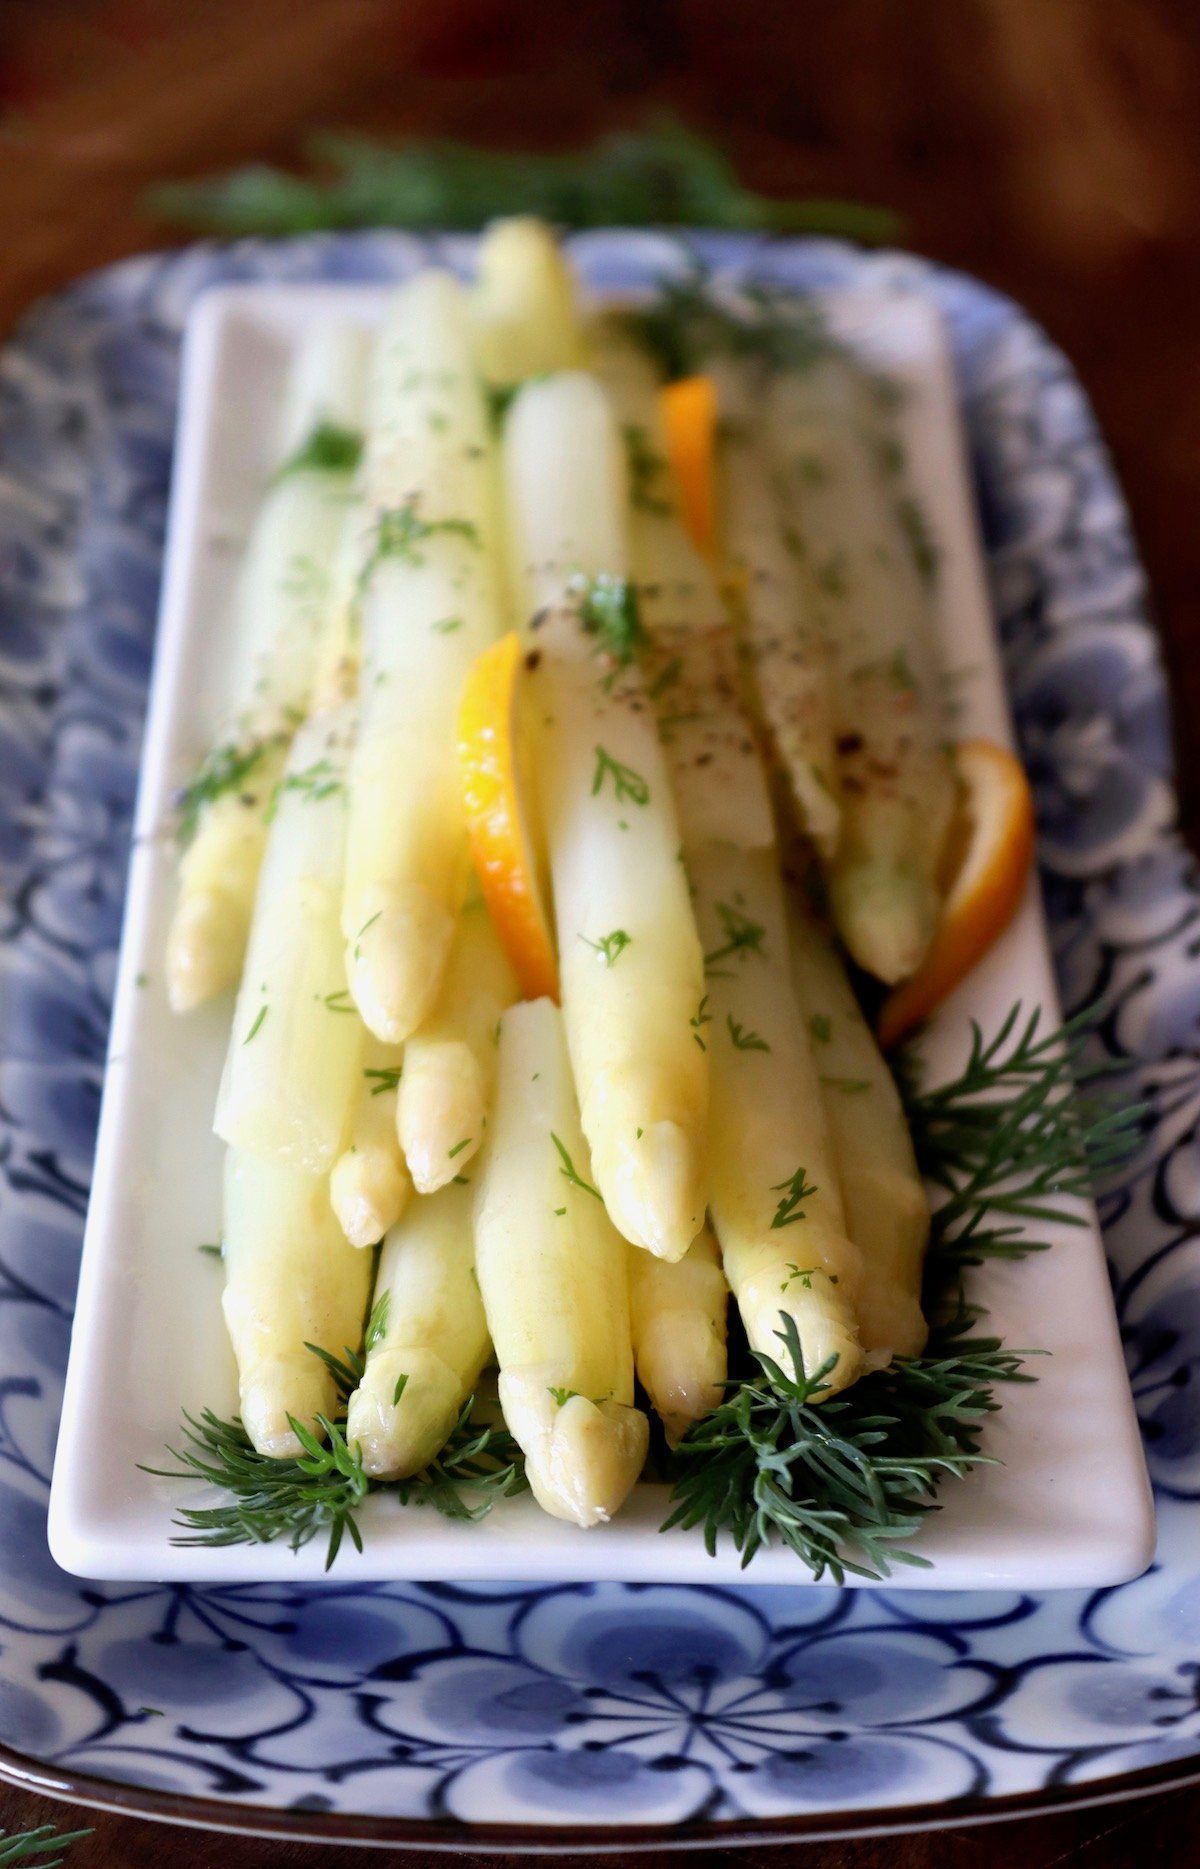 View from spear tips of white asparagus on a rectangular place with fresh dill and lemon slices.